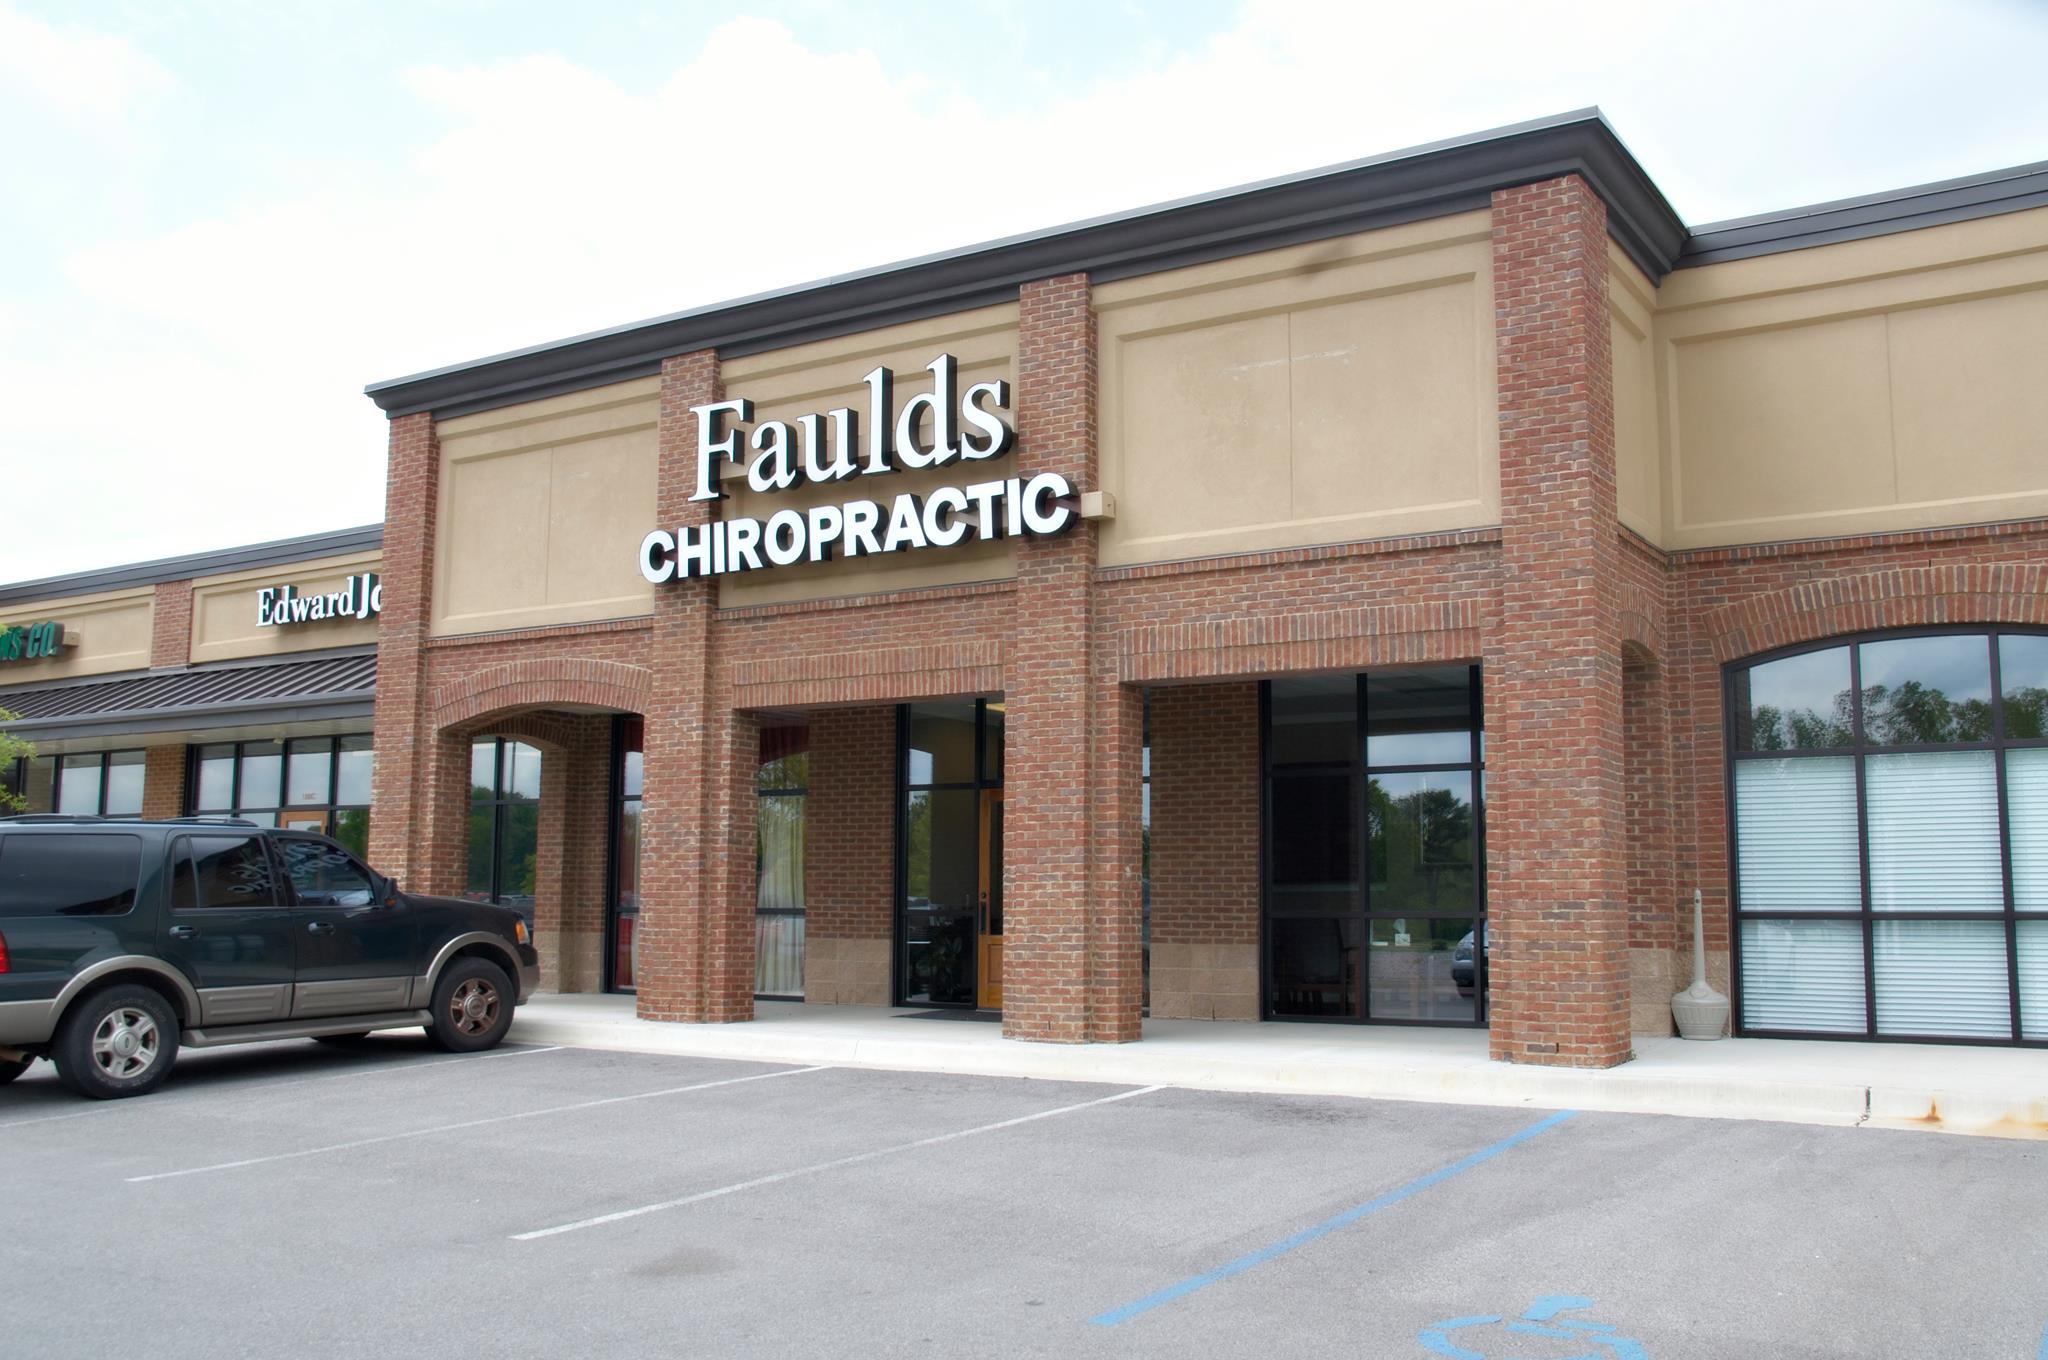 Faulds Chiropractic 180E Old Hwy 431, Owens Cross Roads Alabama 35763